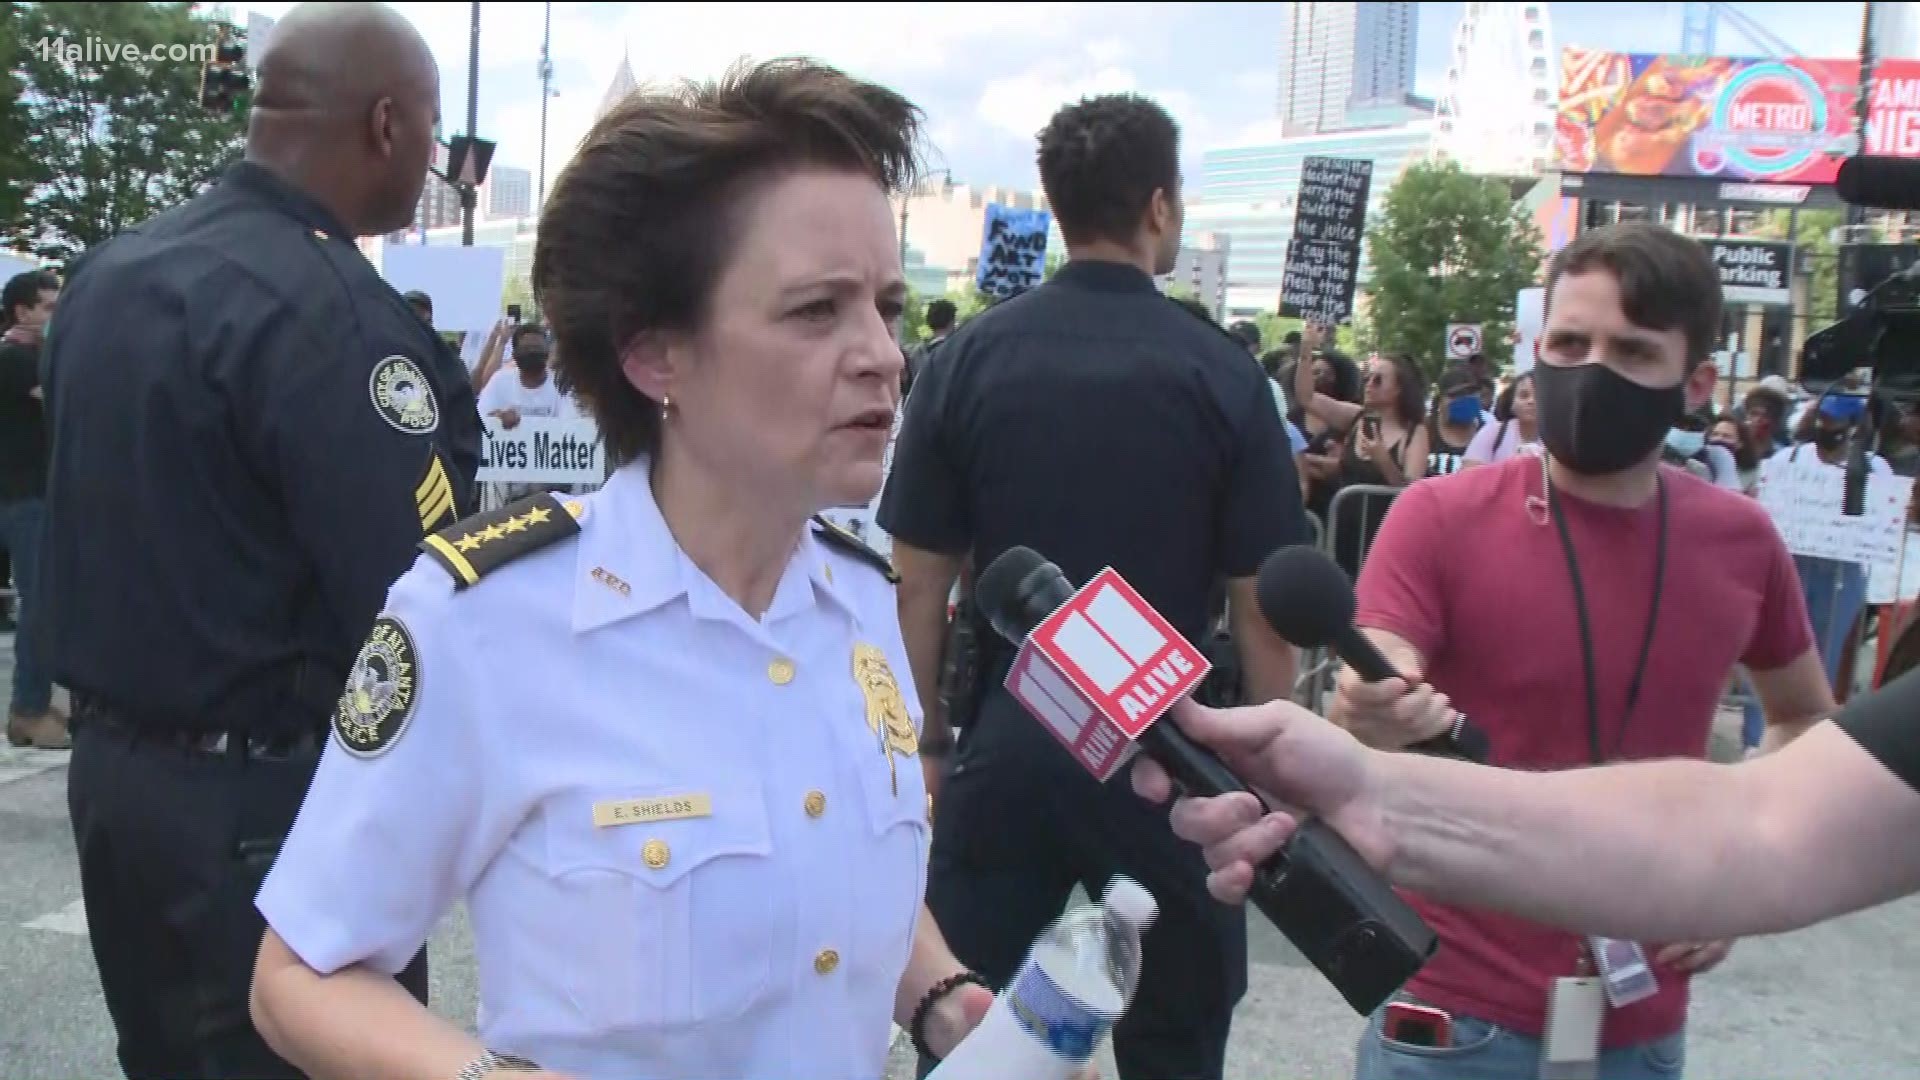 Chief Erika Shields said she things law enforcement has a huge role